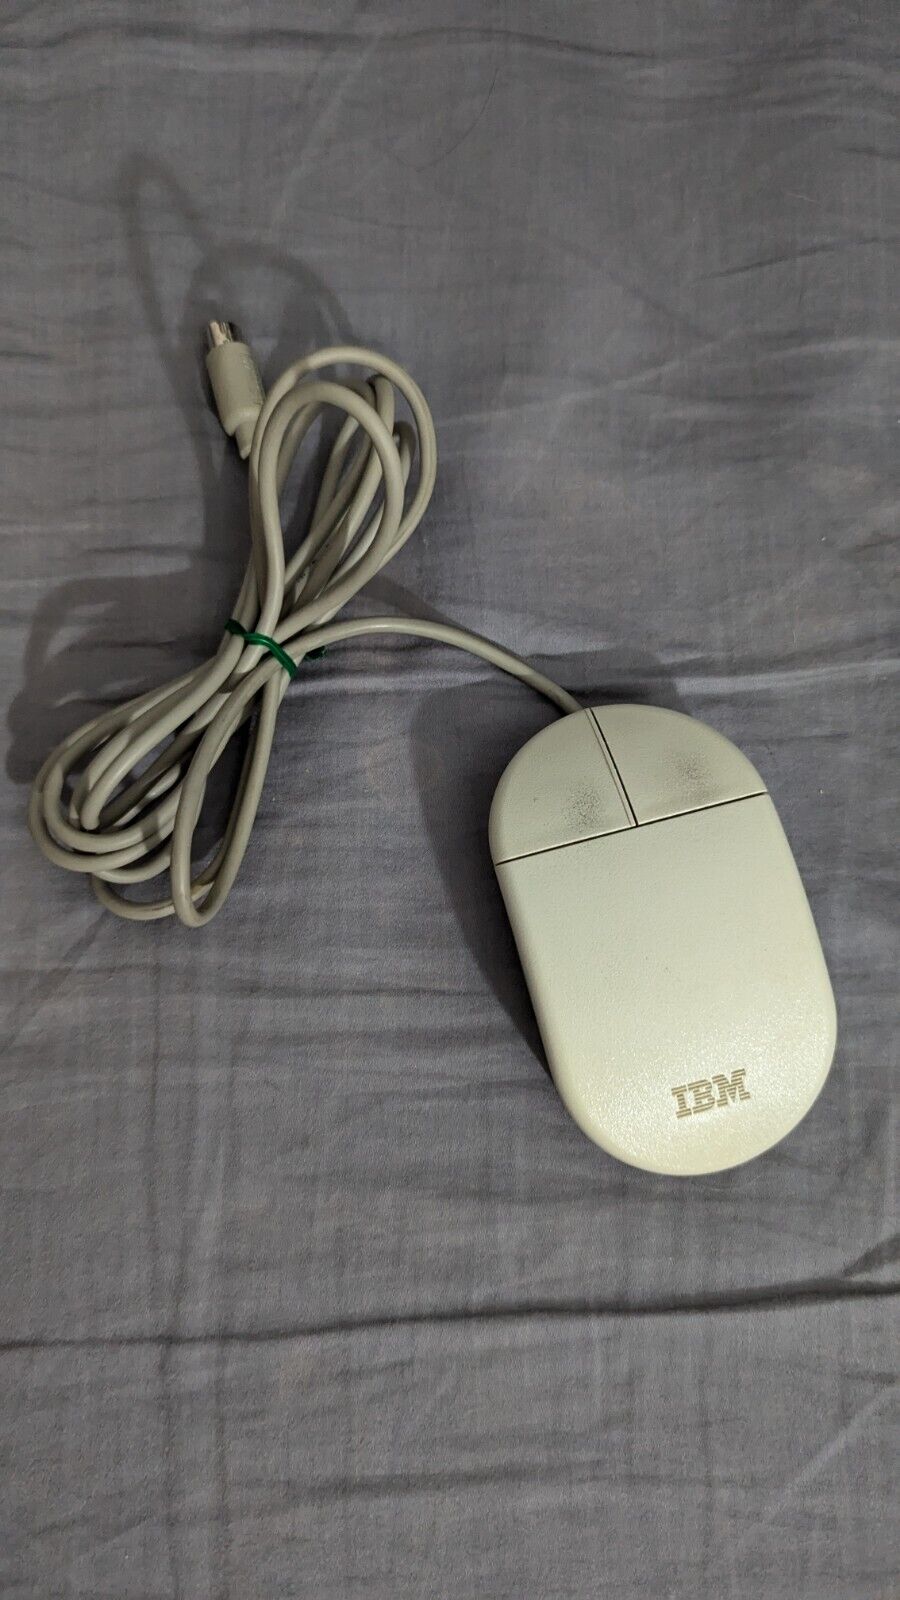 Vintage 1995 IBM Mouse Model 13H6690 - In working condition